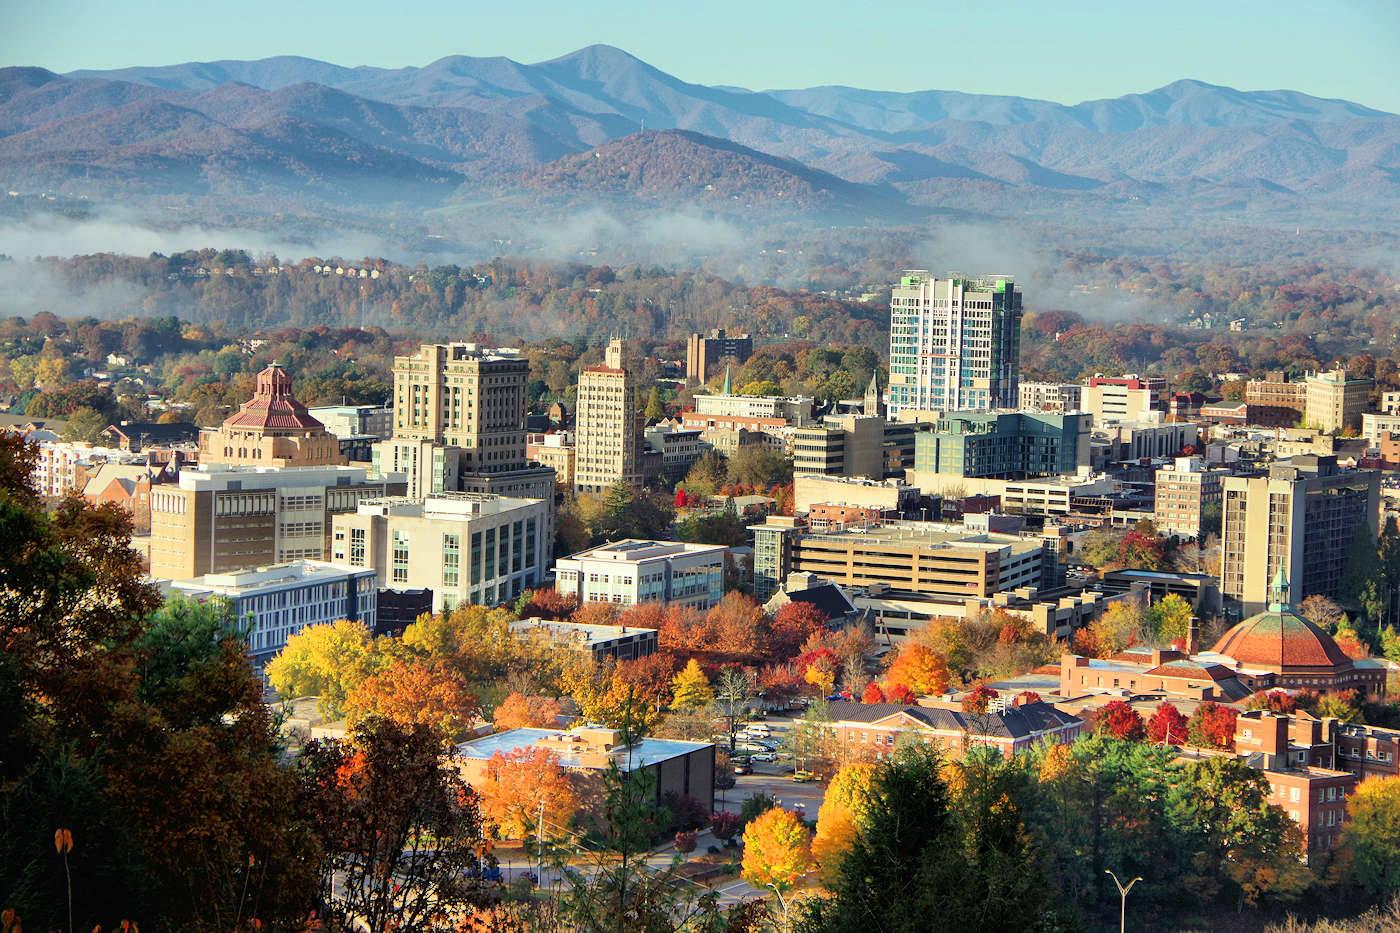 Join Us in Asheville, NC for our 59th Annual Eastern Finance Association Meeting